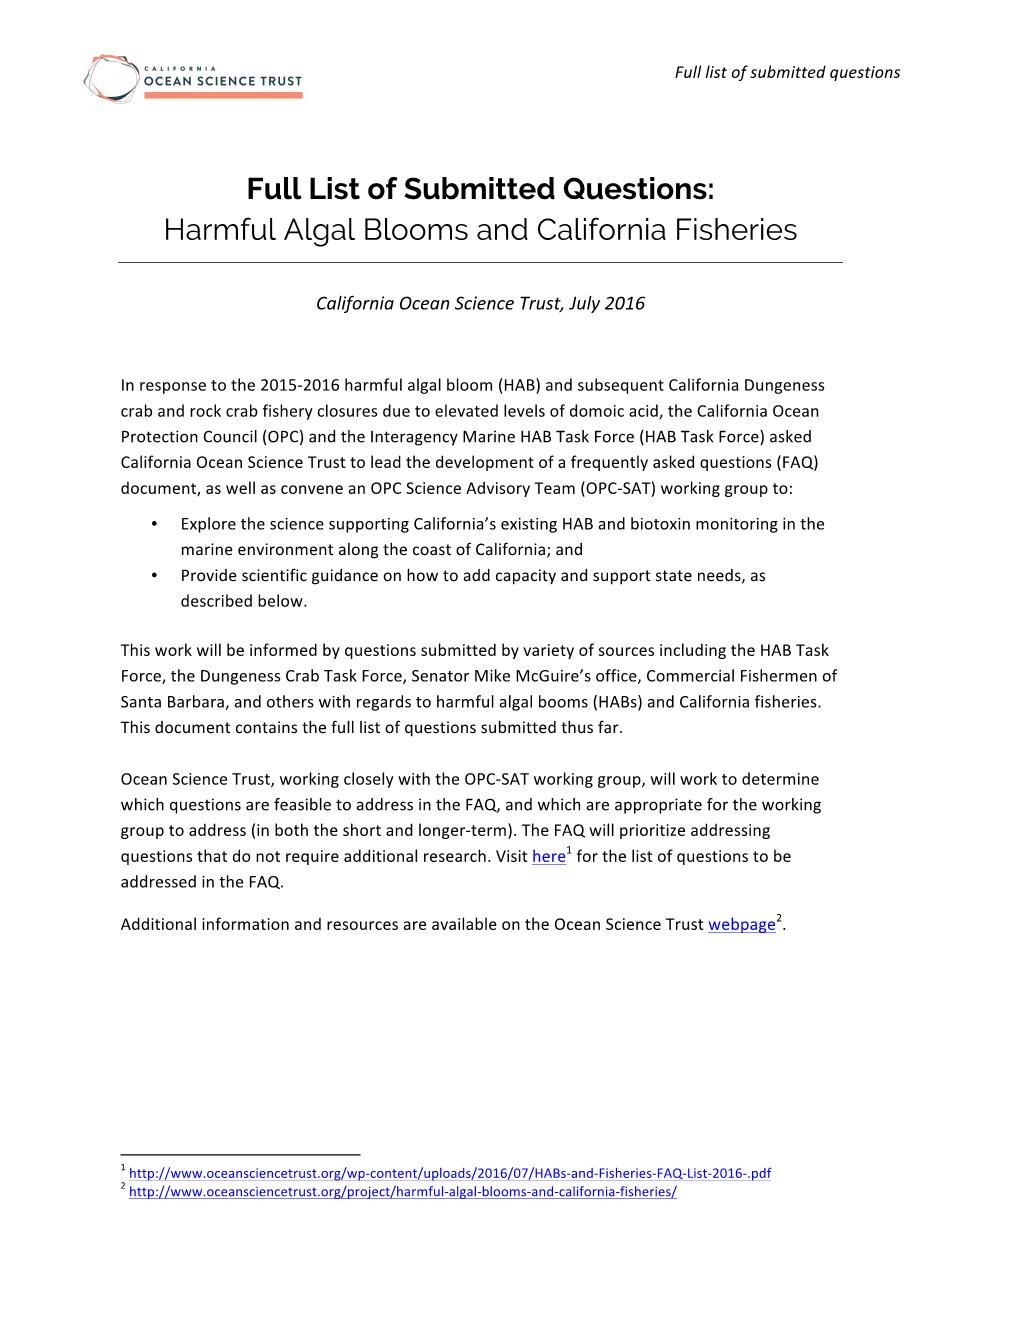 Full List of Submitted Questions: Harmful Algal Blooms and California Fisheries